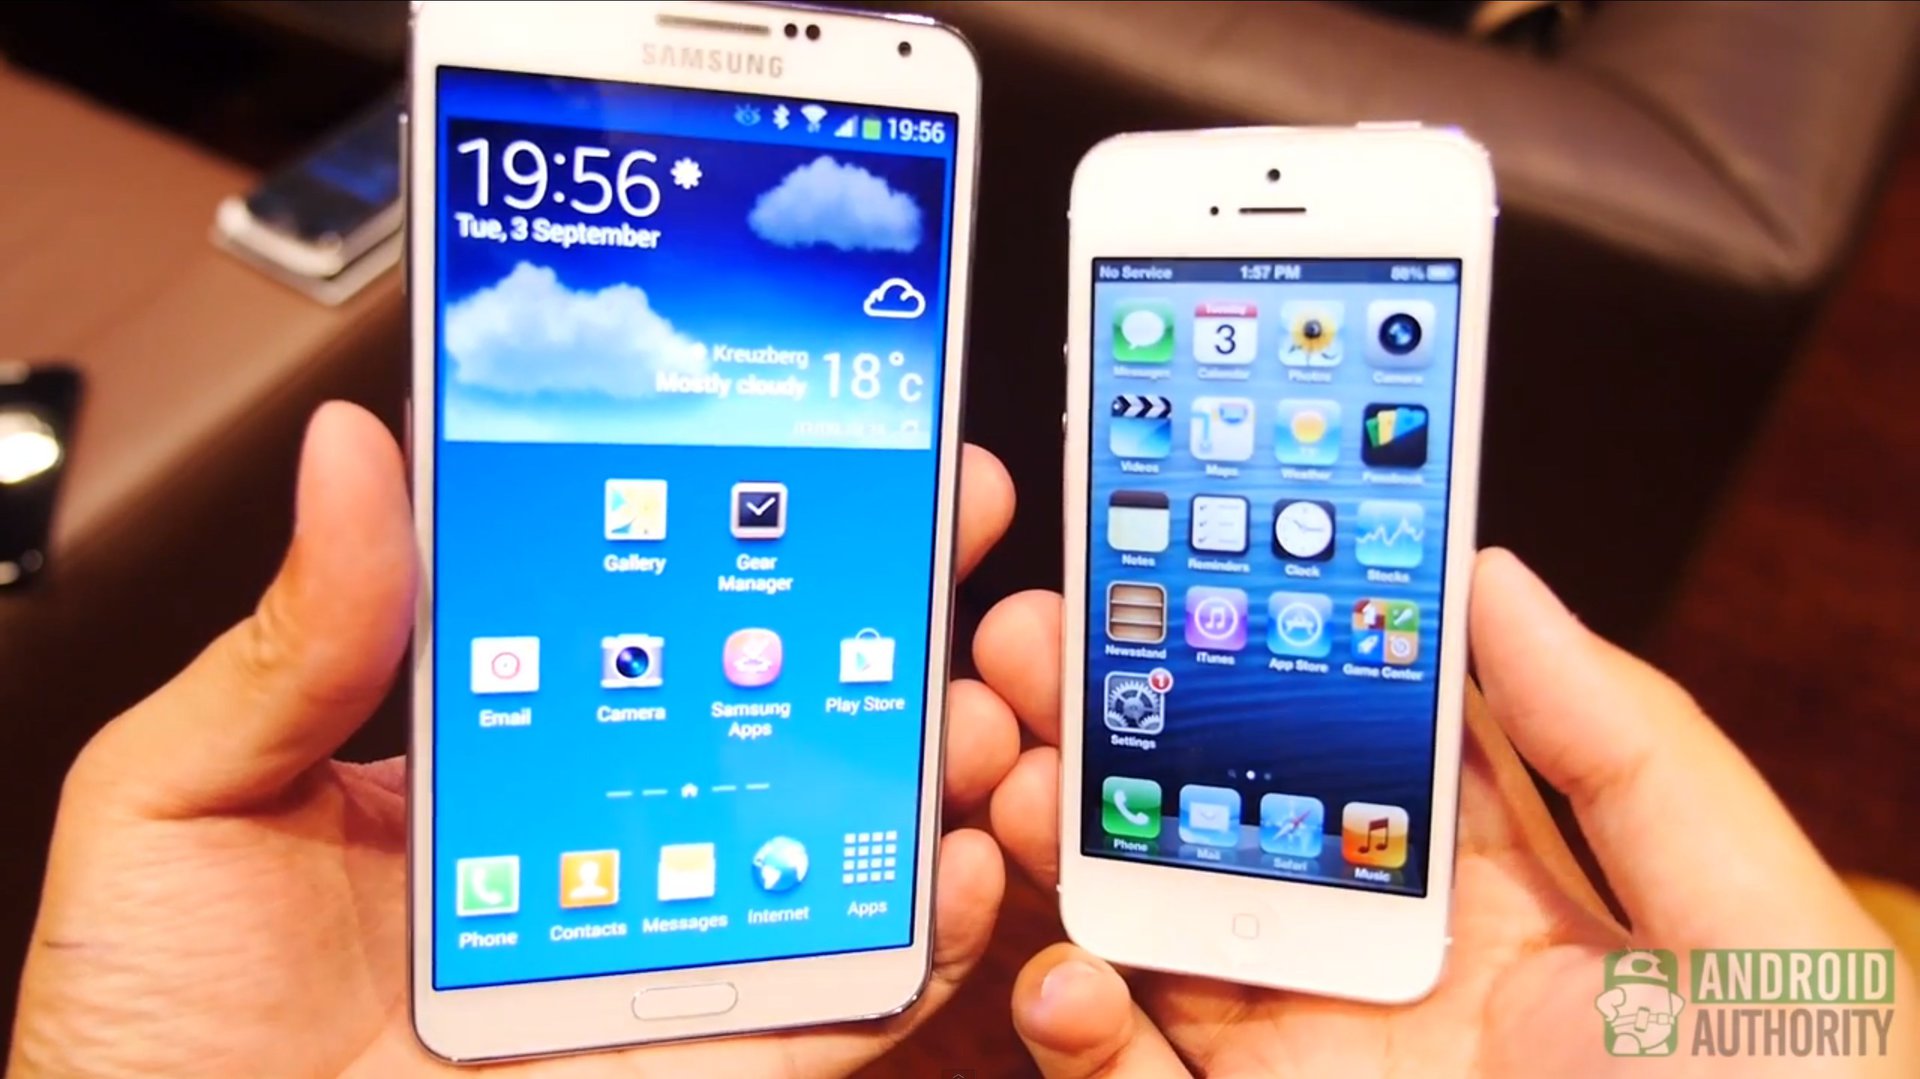 galaxy-note3-vs-iphone-5-front-screens